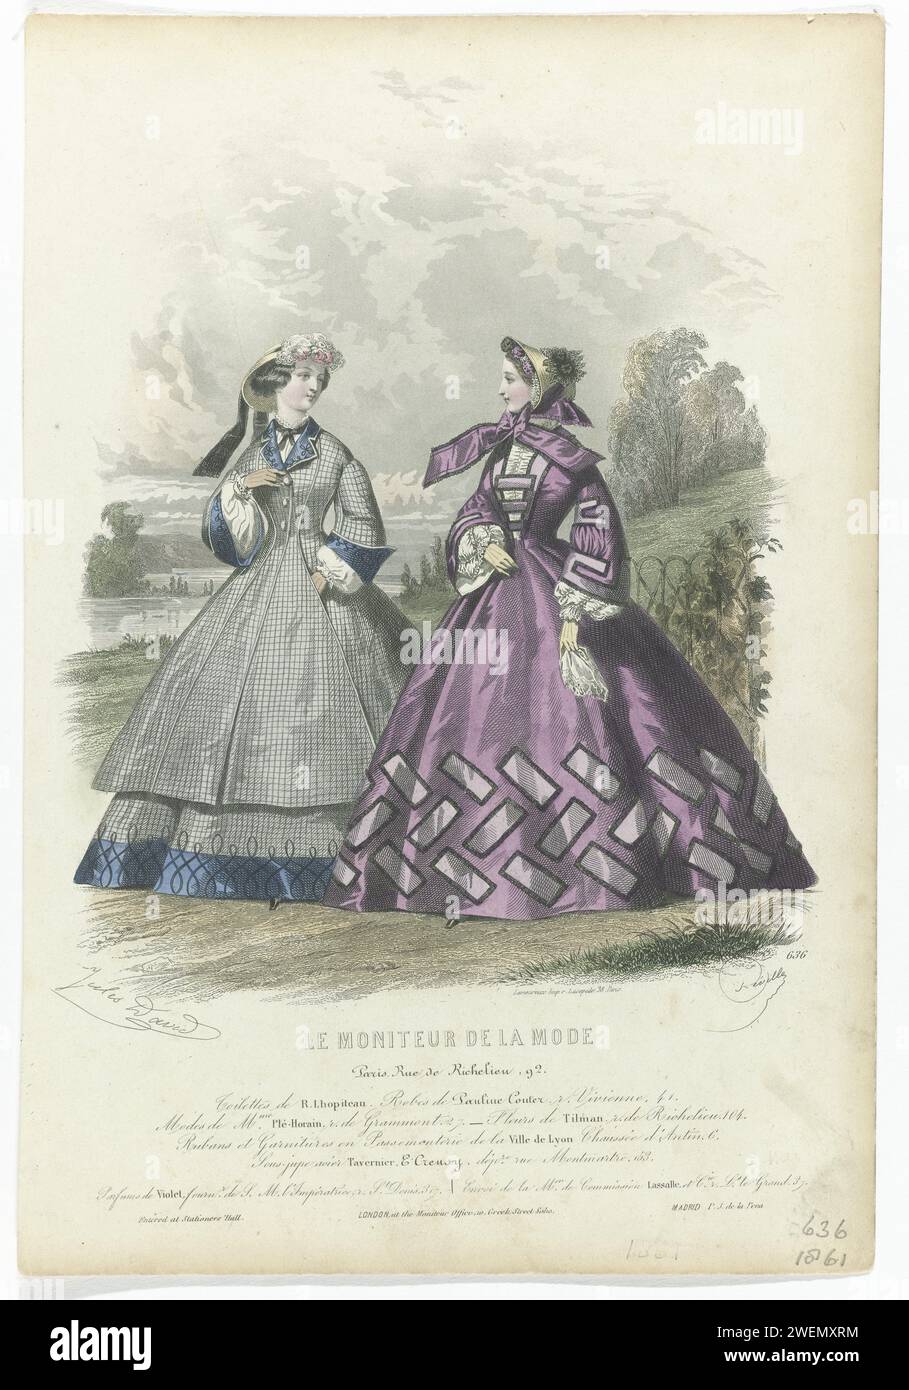 The fashion monitor, 1861, No. 636: toilets of R.LHOPITEAU (...), 1861  Two women in crinilin gowns in the open air. According to the caption: 'toilets' by R. Lhopiteau. Downs by Pauline Couter. 'Modes' by Plé-Horain. Below some lines of advertising text for different products. Print from the fashion magazine Le Monitor de la Mode (1843-1913).  paper steel engraving fashion plates.. head-gear (+ women's clothes). gloves, mittens, etc. (+ women's clothes). handkerchief (+ women's clothes). ornamental parts of clothing (+ women's clothes) Stock Photo